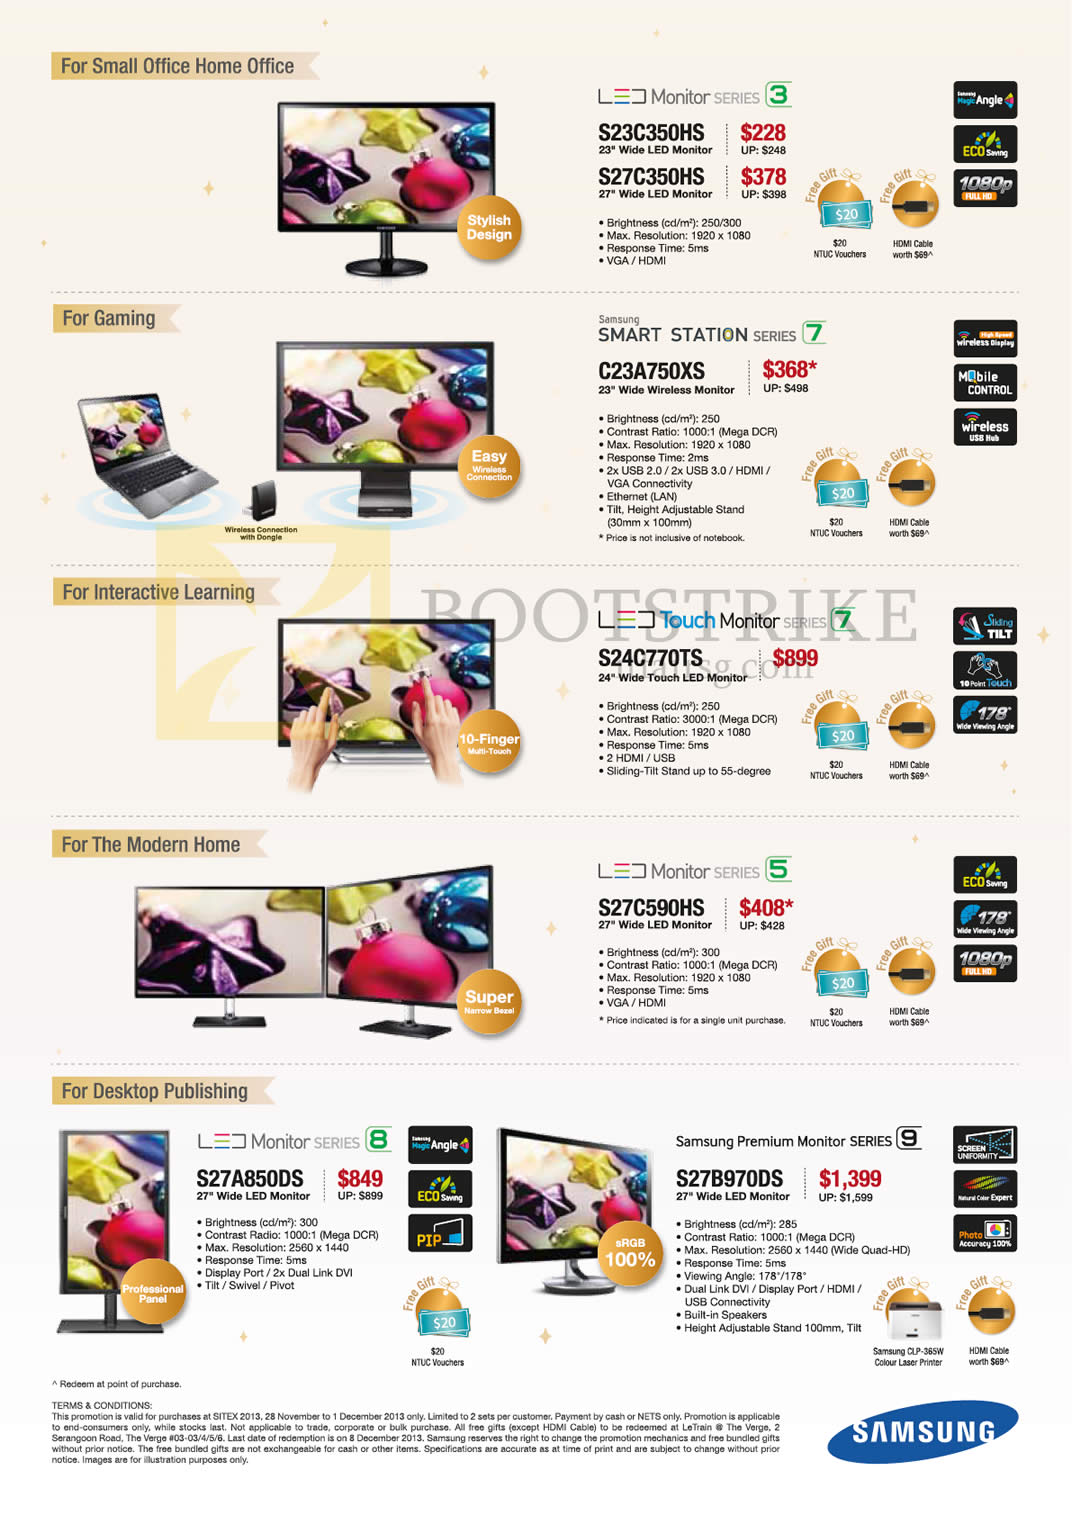 SITEX 2013 price list image brochure of Samsung Monitors LED S23C350HS S27C350HS C23A750XS S24C770TS S27C590HS S27B970DS S27A850DS